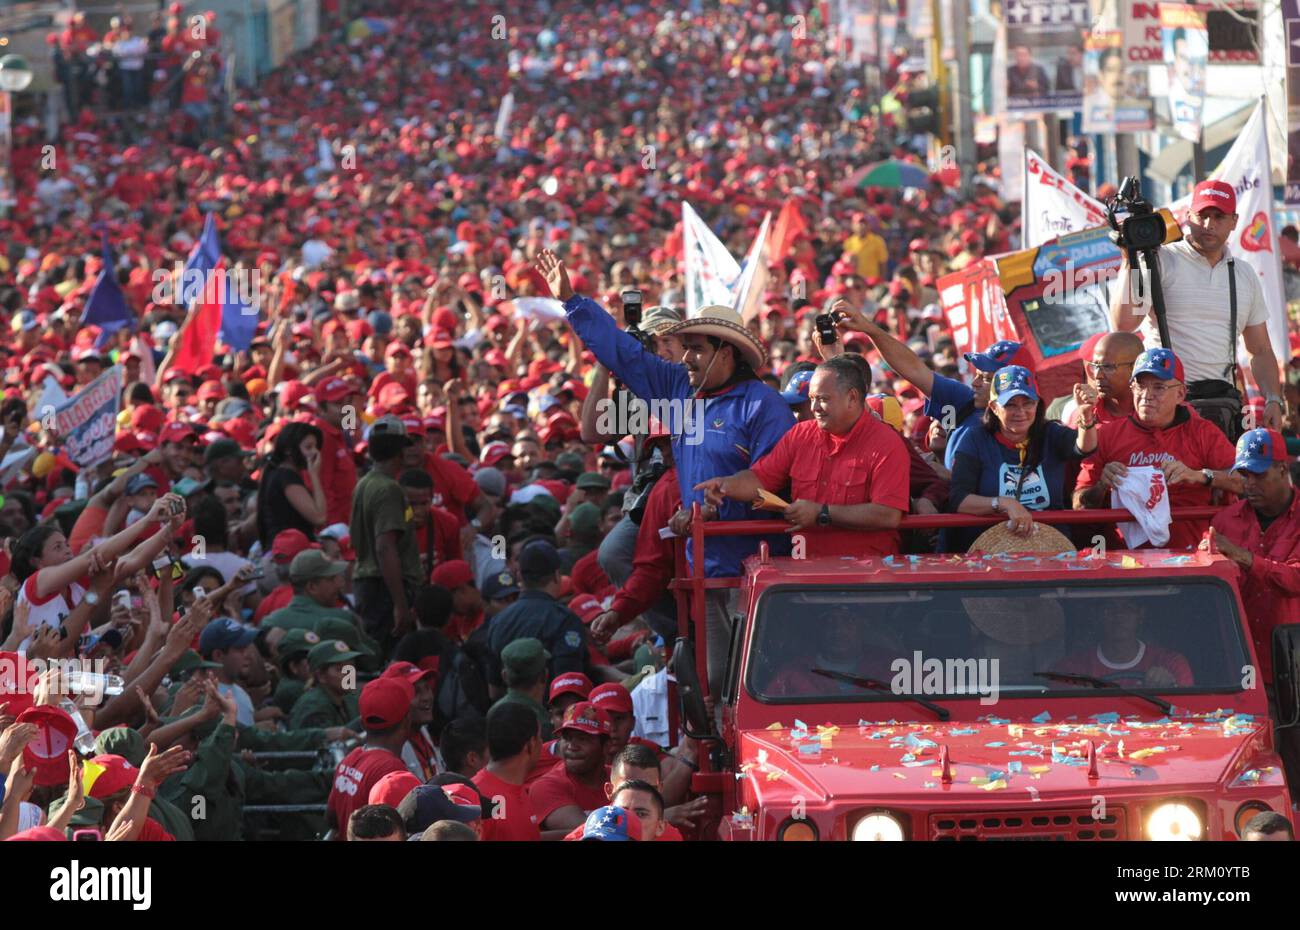 Bildnummer: 59482945  Datum: 07.04.2013  Copyright: imago/Xinhua Image provided by Hugo Chavez Campaign Comand shows Venezuelan acting President and presidential candidate Nicolas Maduro attending his closing campaign, in San Juan de los Morros, state of Guaruco, Venezuela, on April 7, 2013. (Xinhua/Hugo Chavez Campaign Comand) (ah) (sp) VENEZUELA-GUARICO-ELECTION RALLY-MADURO PUBLICATIONxNOTxINxCHN Politik people Wahl Präsidentschaftswahl Wahlkampf xas x0x 2013 quer premiumd     59482945 Date 07 04 2013 Copyright Imago XINHUA Image provided by Hugo Chavez Campaign Comand Shows Venezuelan Acti Stock Photo